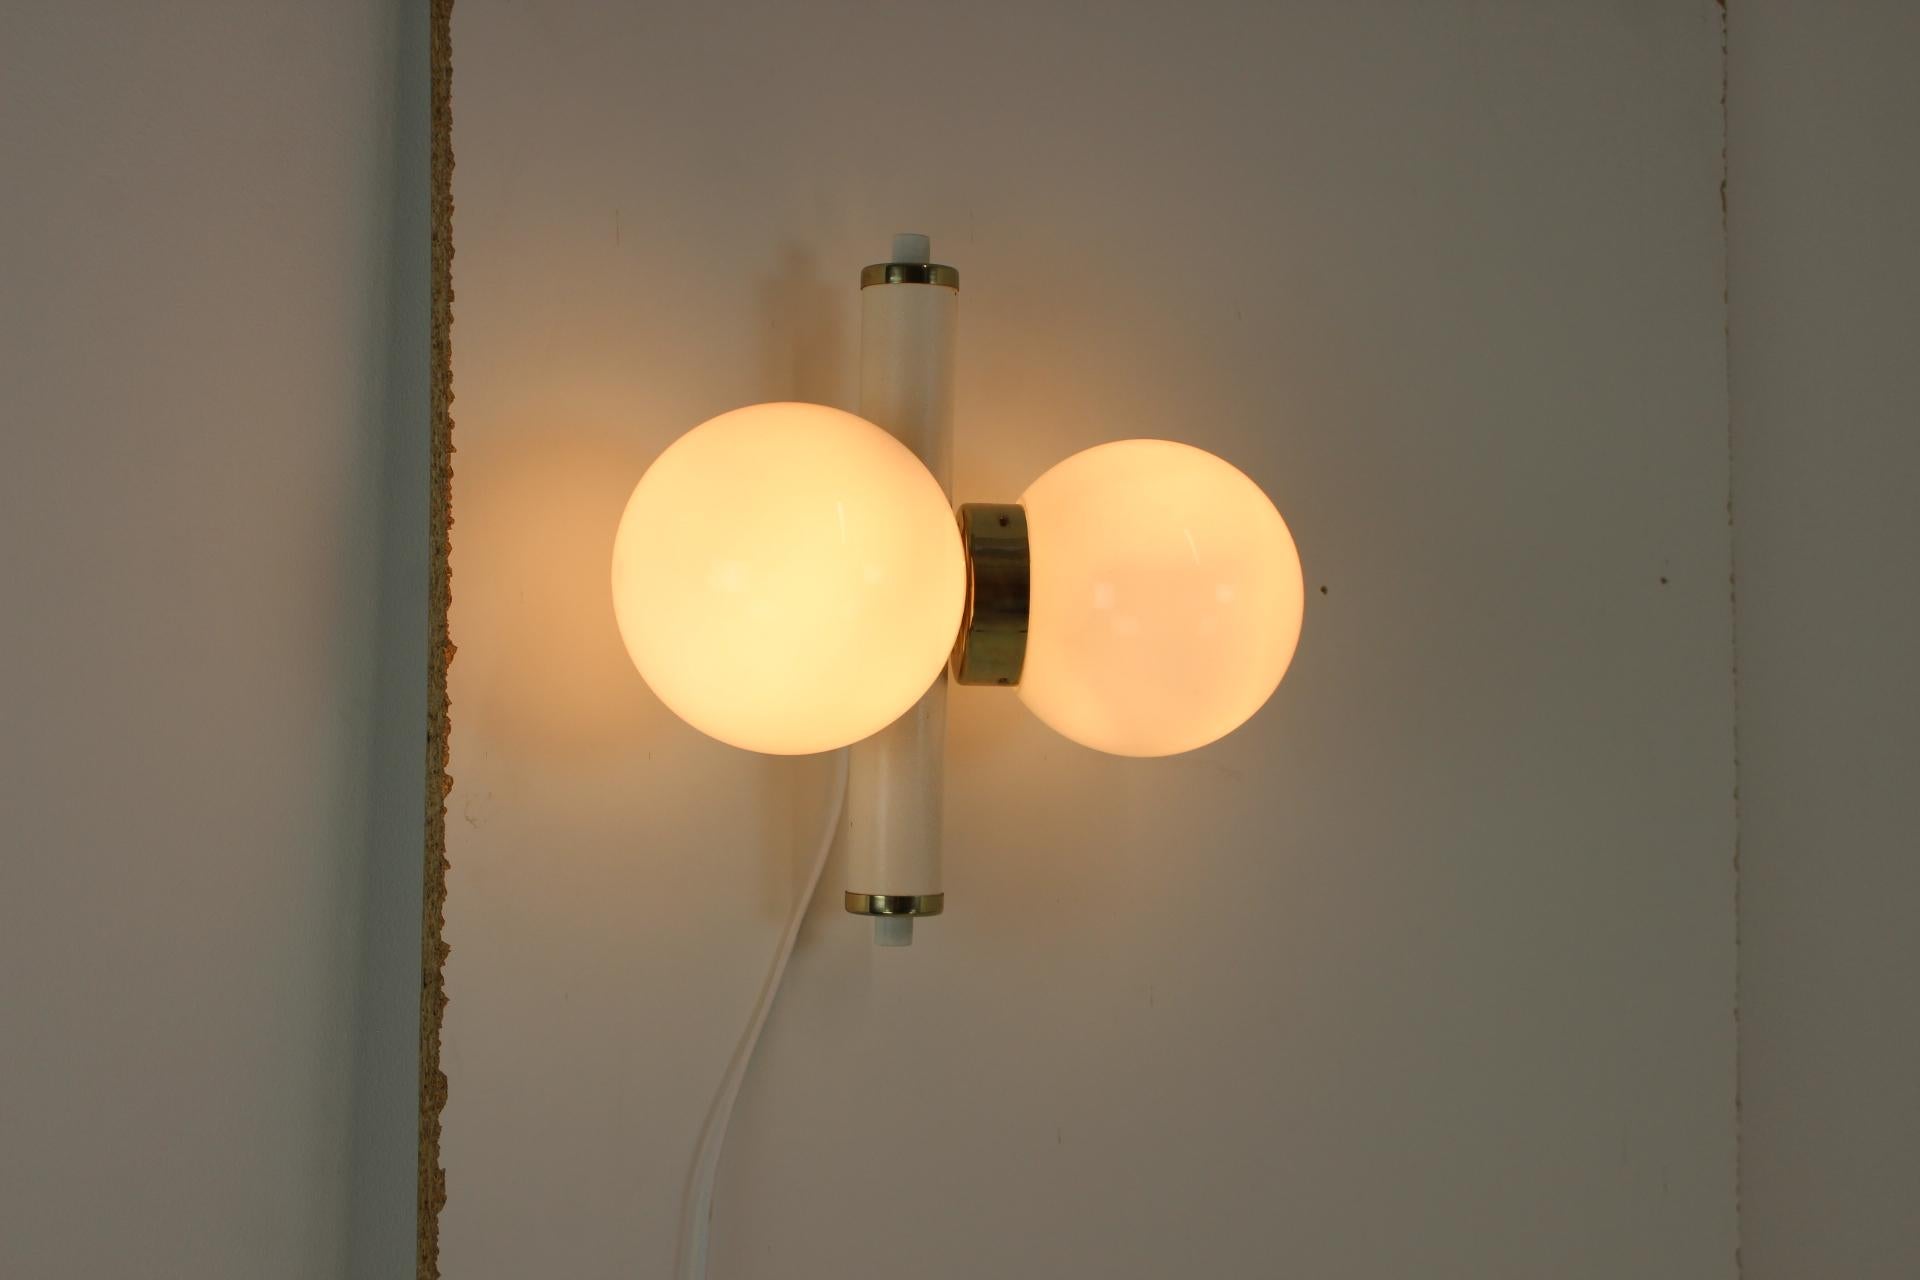 Czech Mid-Century Set of 2 Wall Lamps by Instala Jilove, 1970’s For Sale